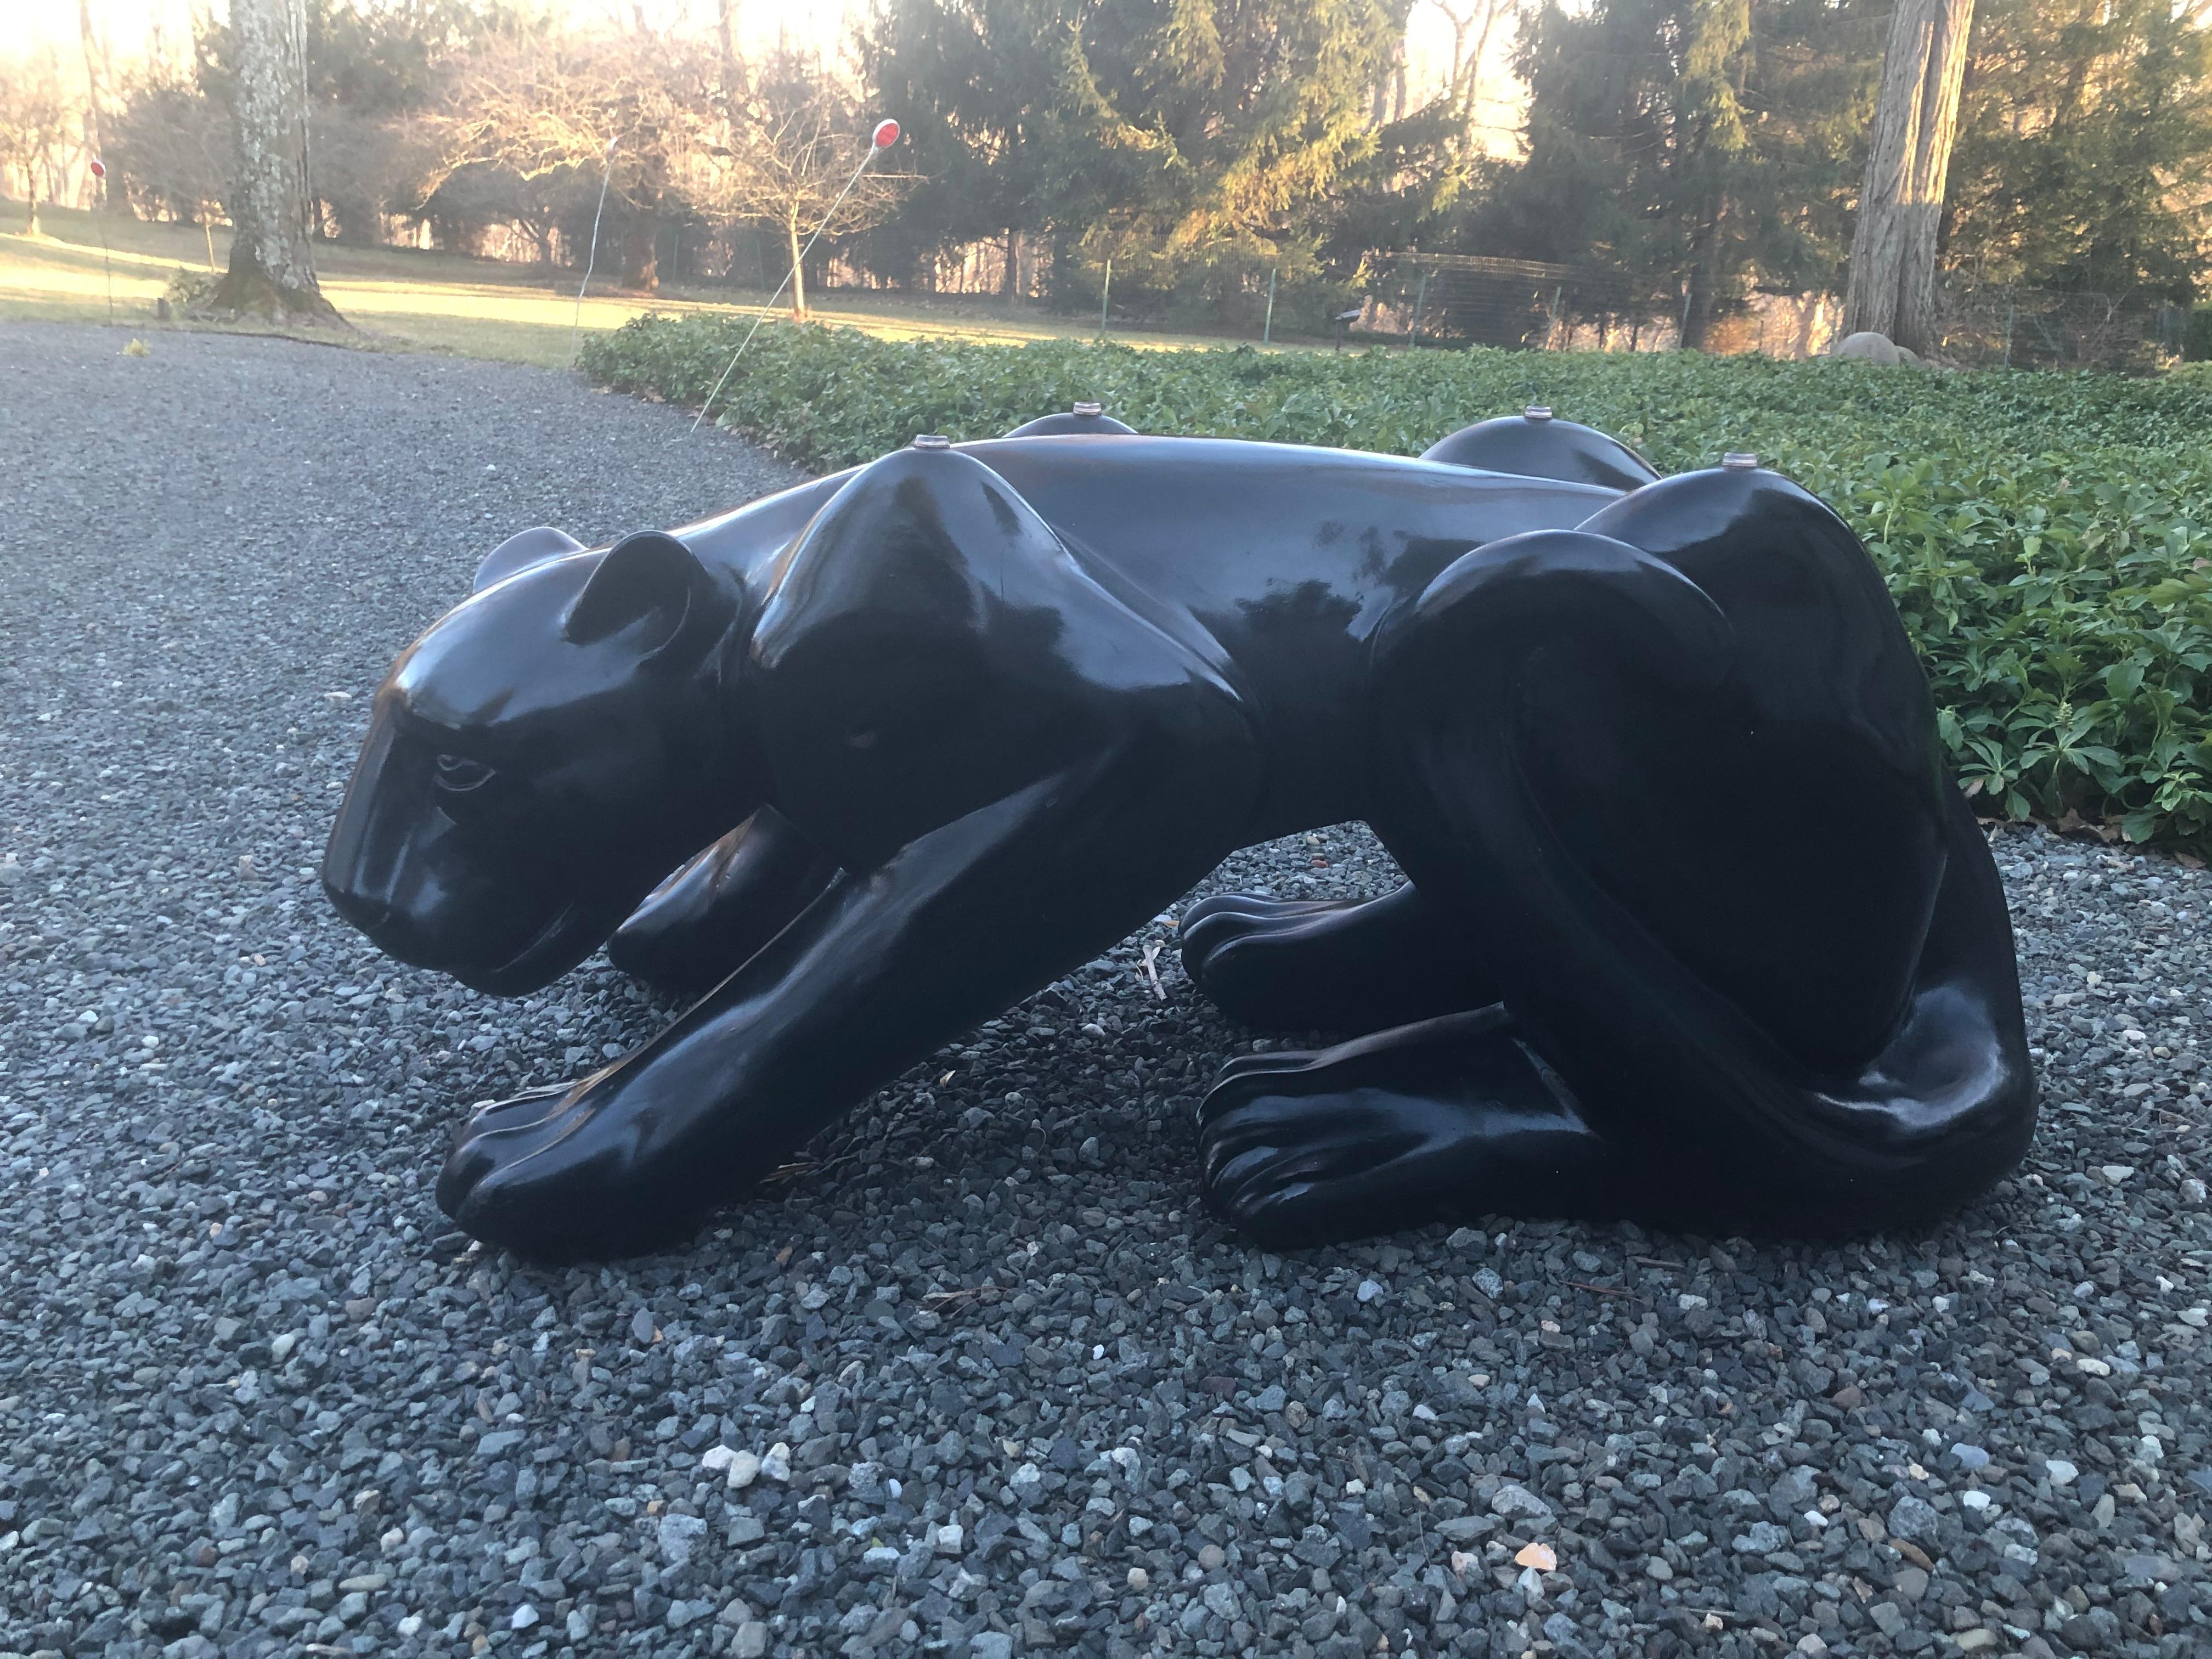 Striking 1970s ceramic Black Panther cocktail table having sculptural about to pounce panther base with expressive face and oval glass top. Table is very heavy and in very good condition. The glass has no scratches and is oval with a polished edge,